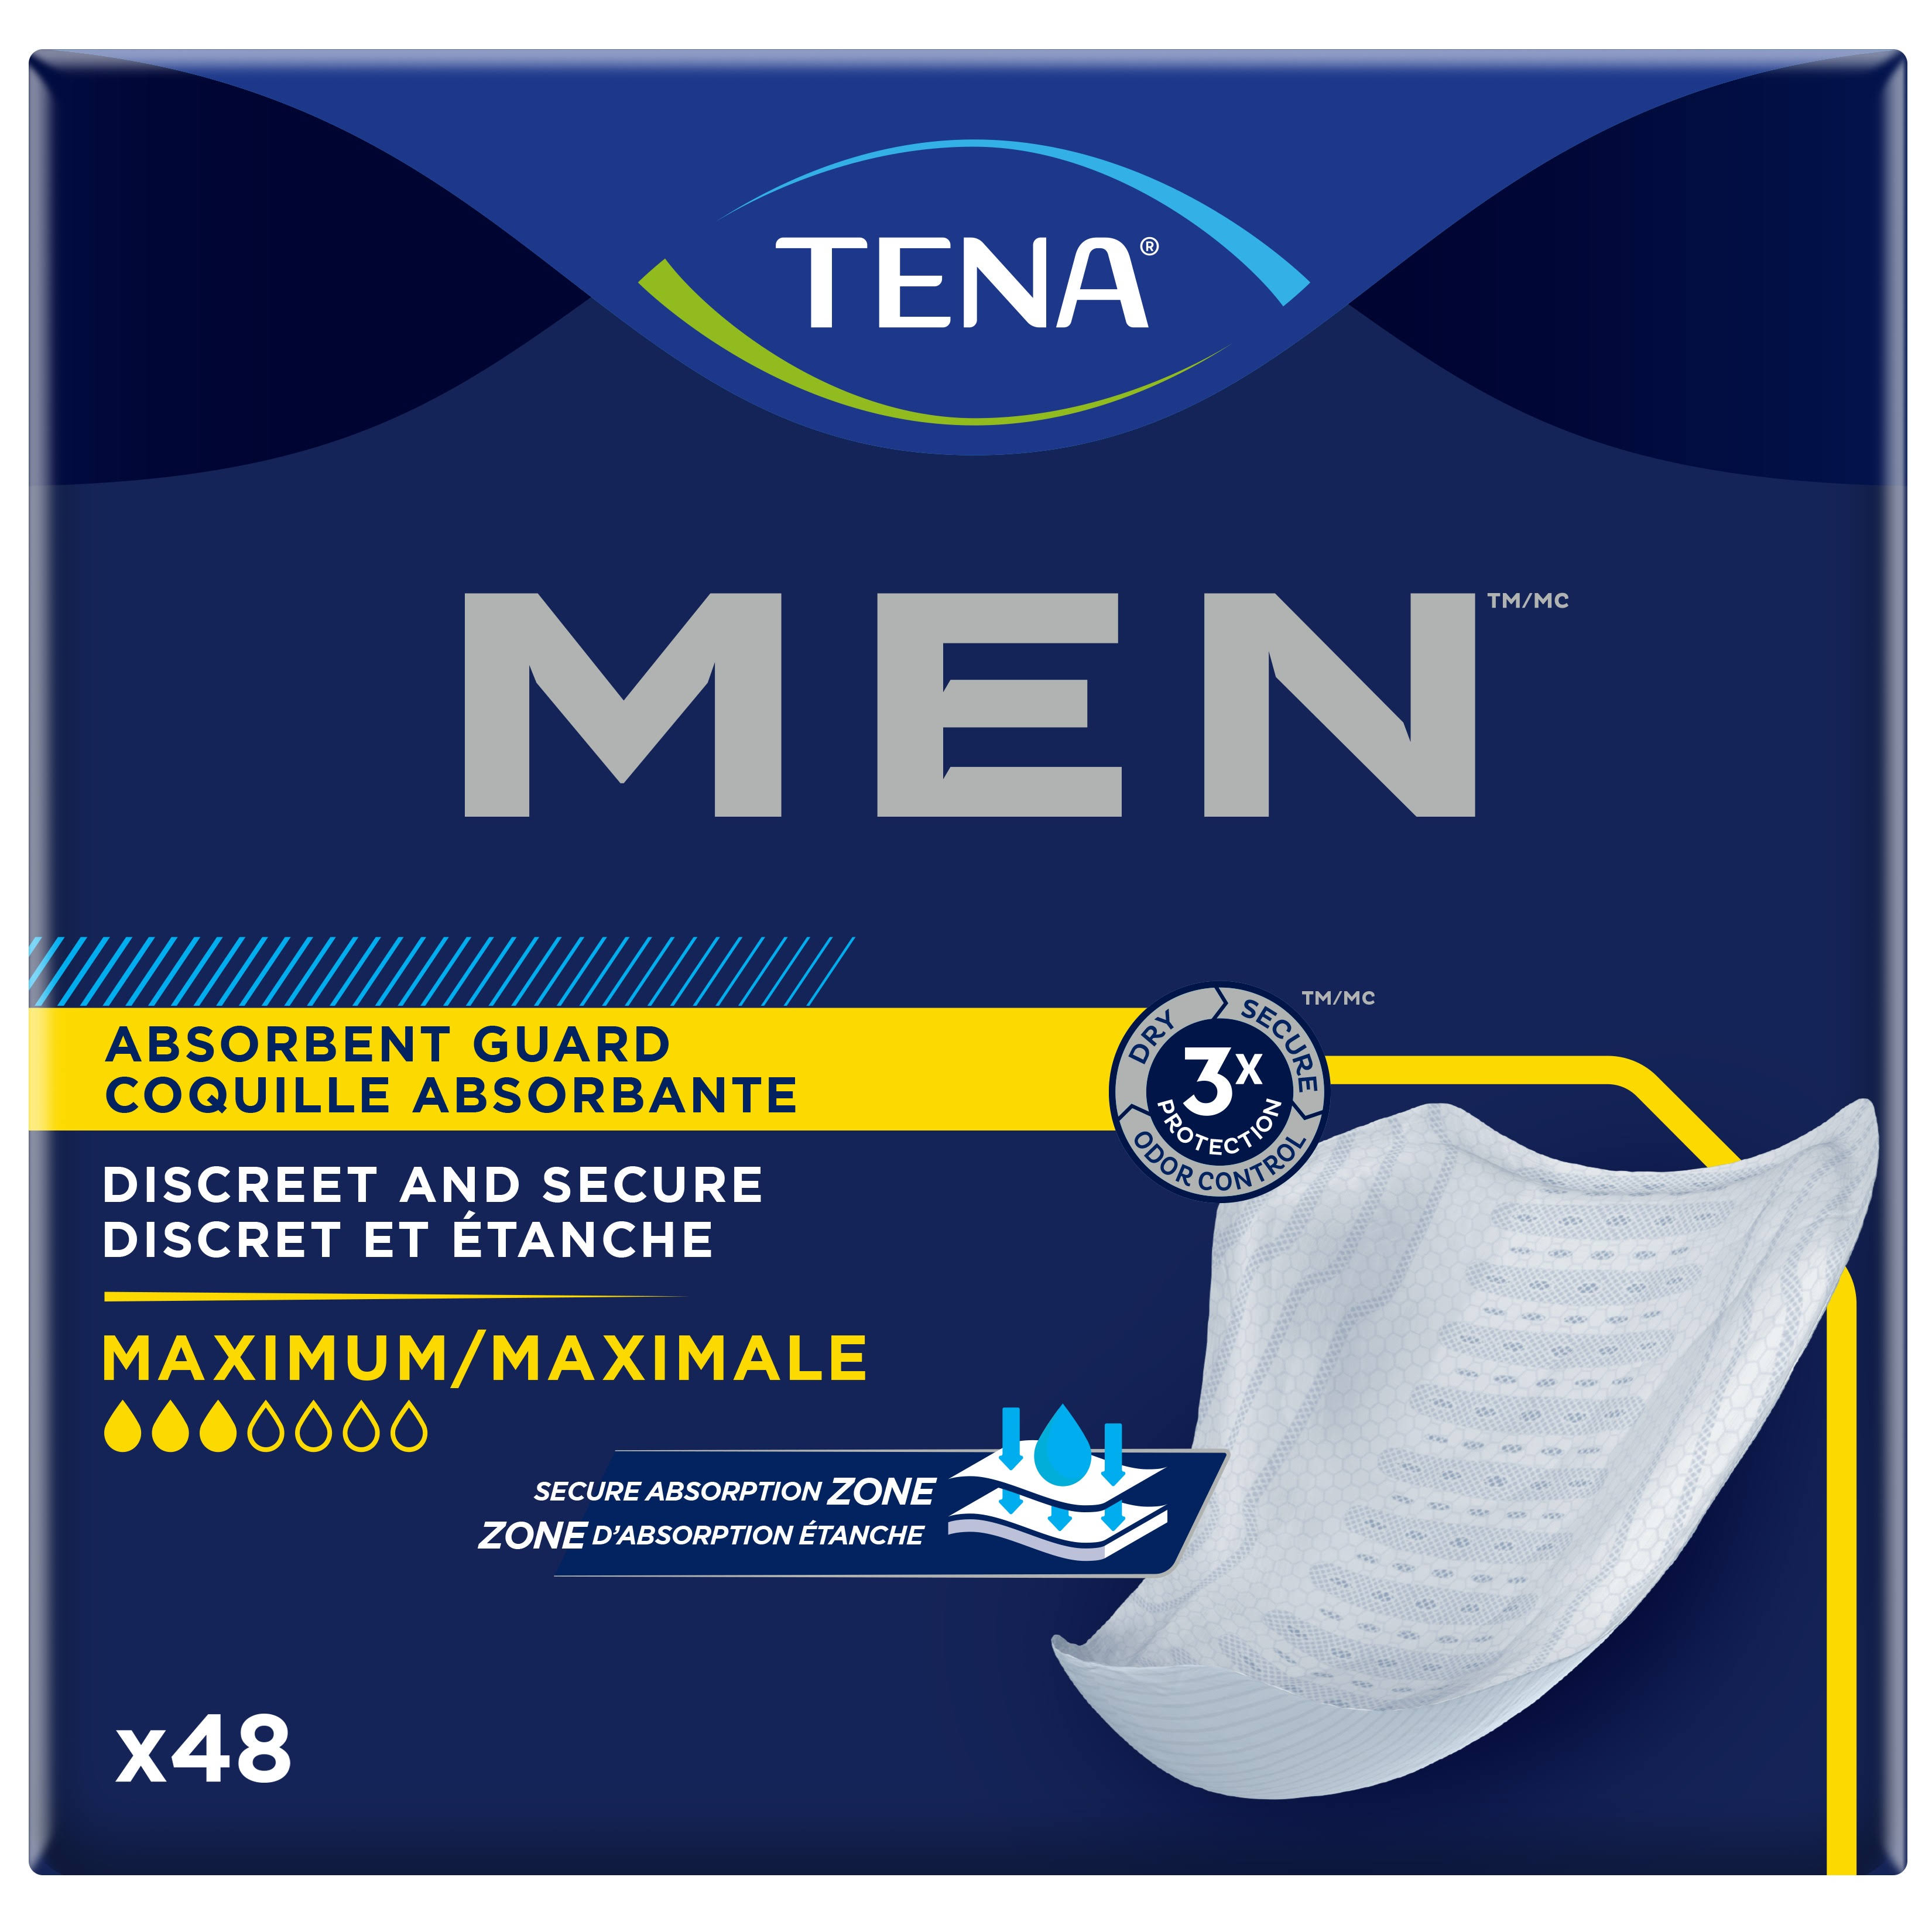 Tena Mens Incontinence Guards - Moderate Absorbency, 48ct